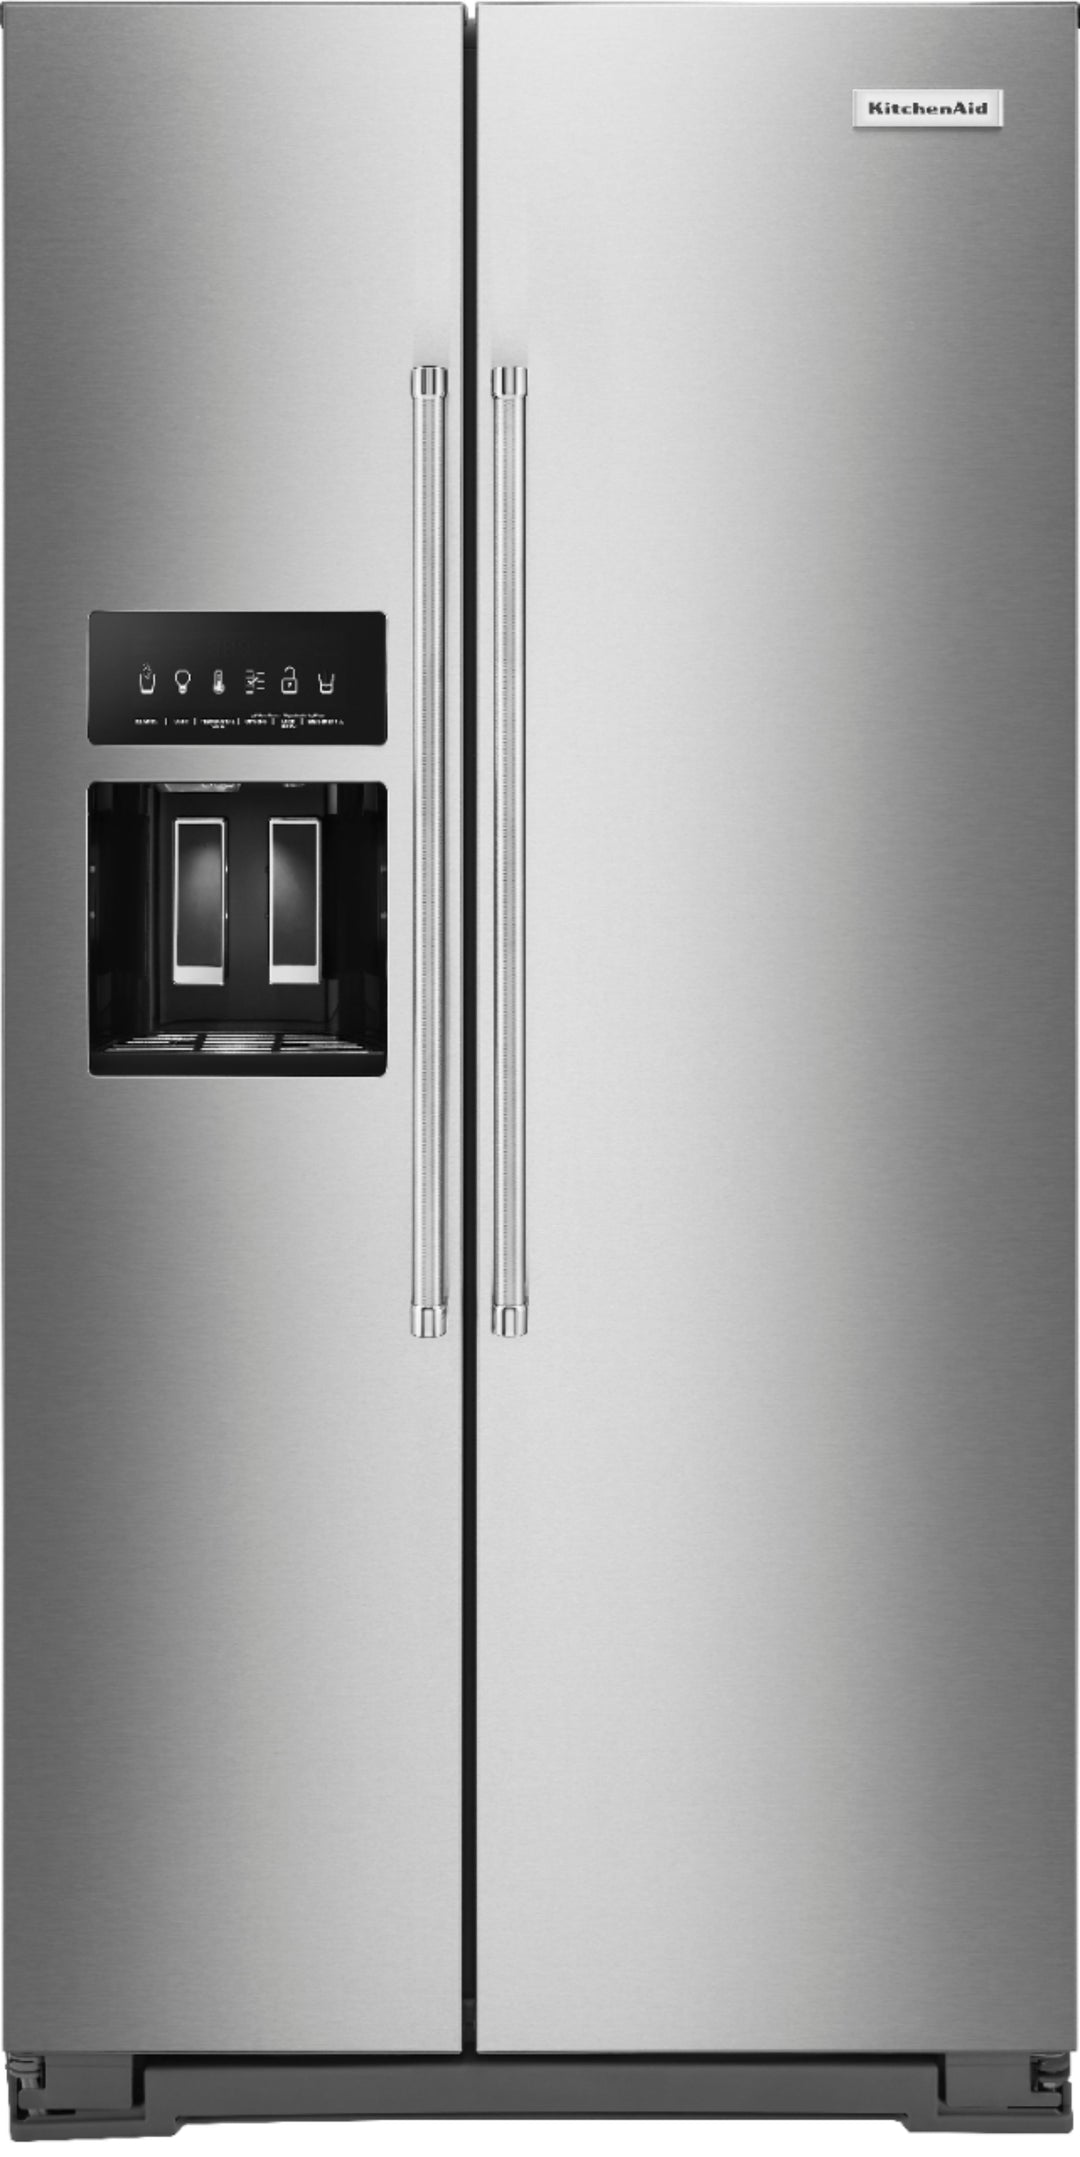 KitchenAid - 22.6 Cu. Ft. Side-by-Side Counter-Depth Refrigerator - Stainless steel_0